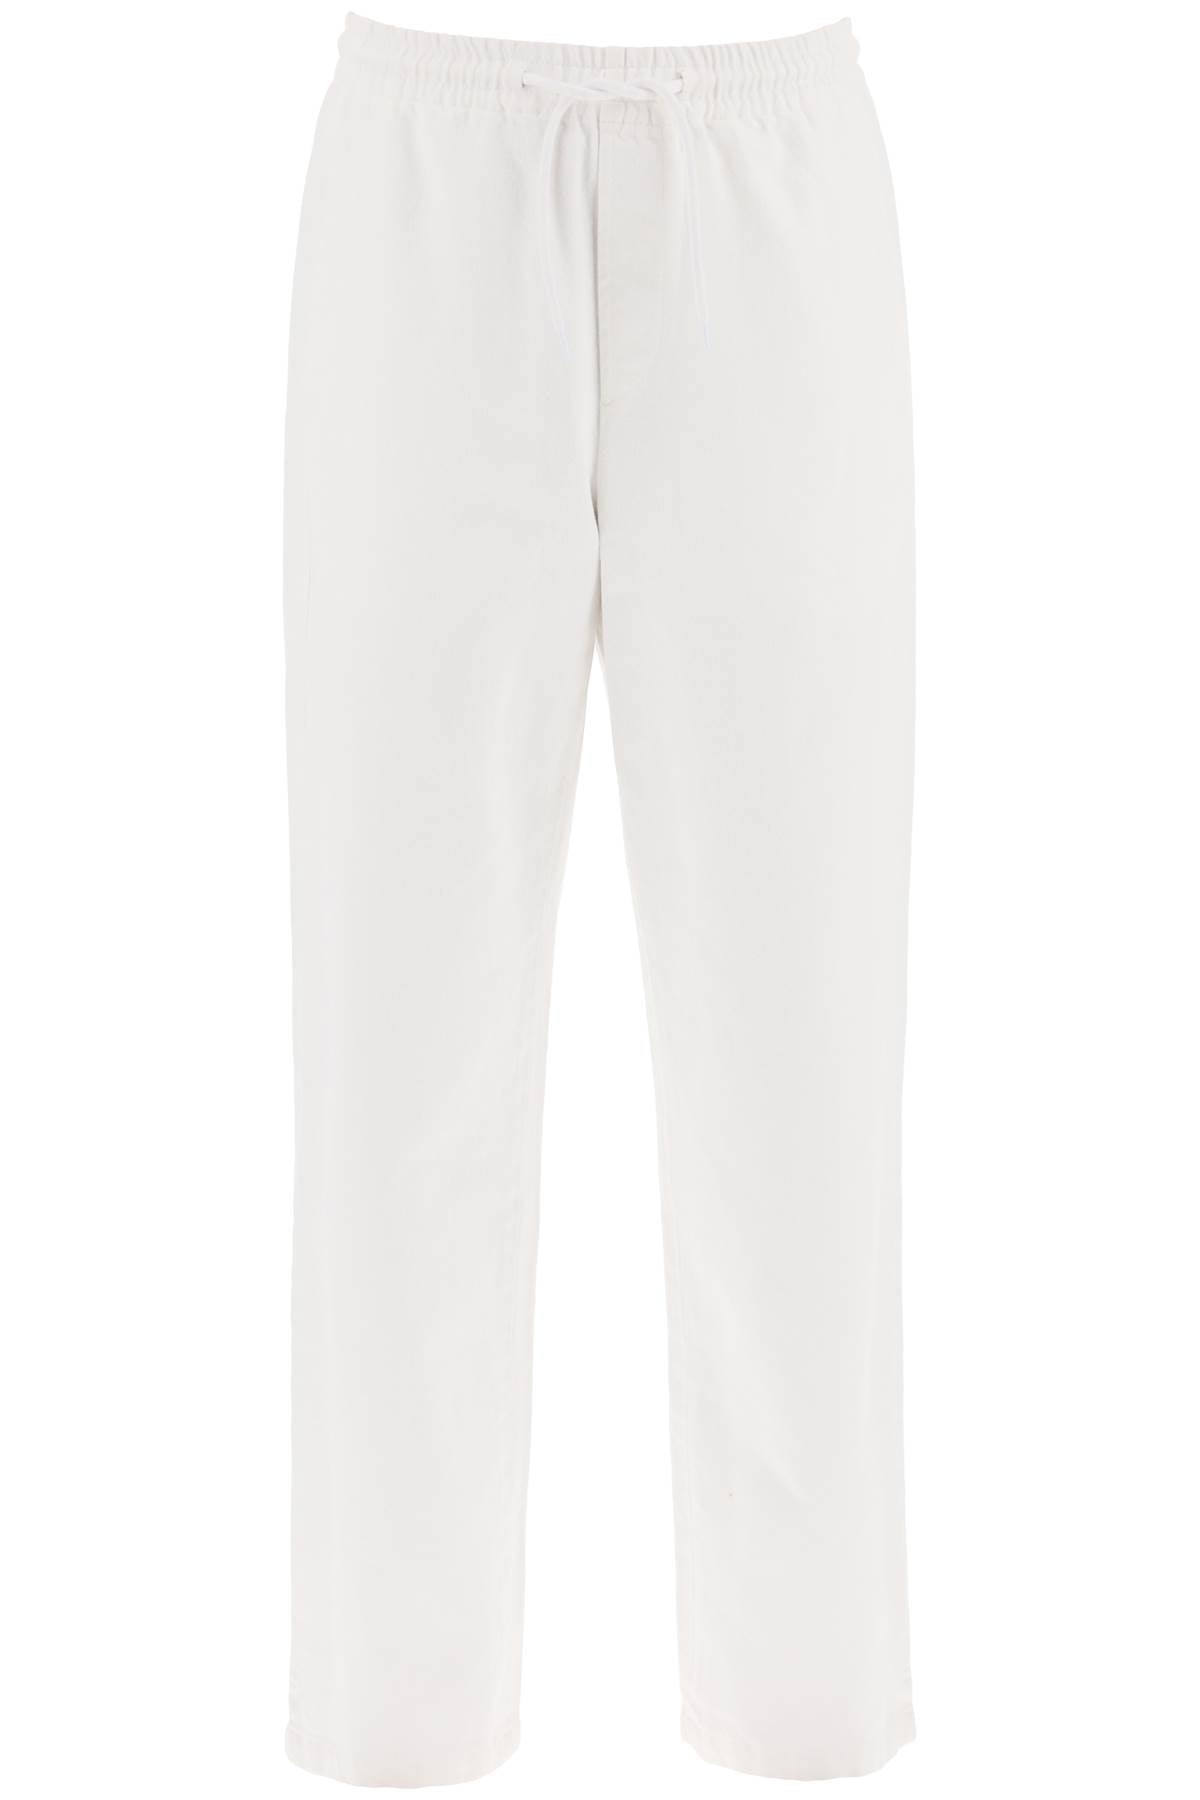 Apc Vincent Jeans With Drawstring Waistband In White